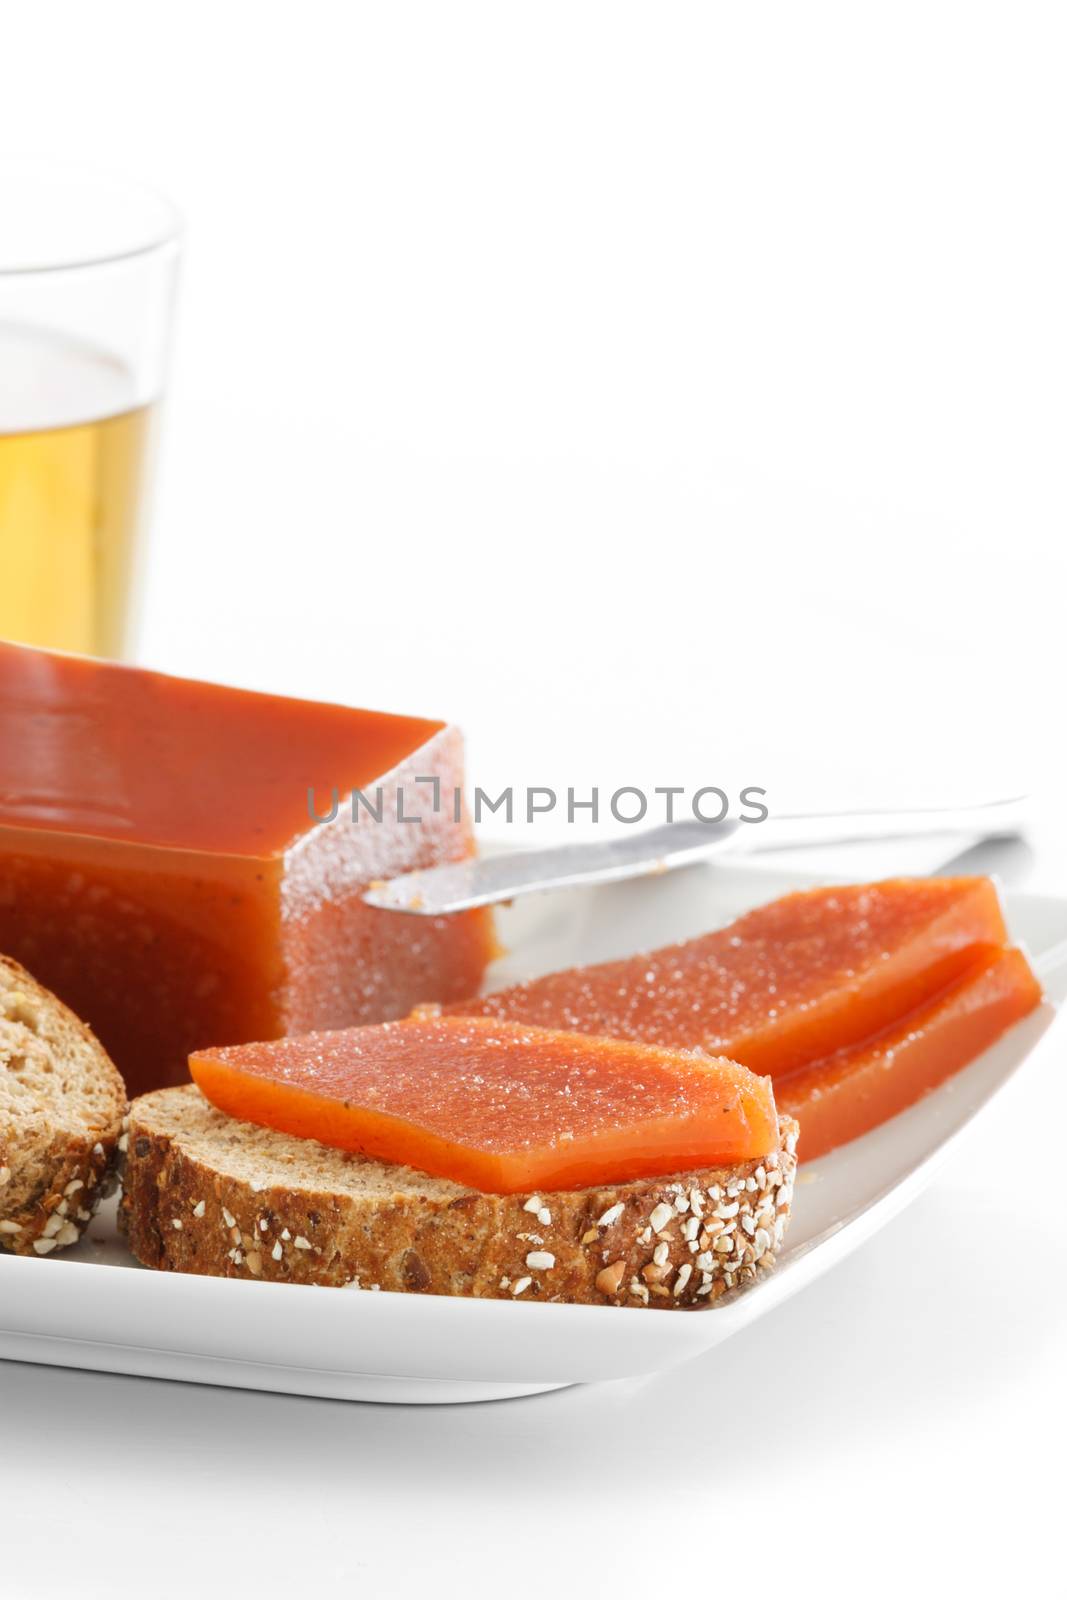 Quince jam slices on seeds bread on a plate over a white background.